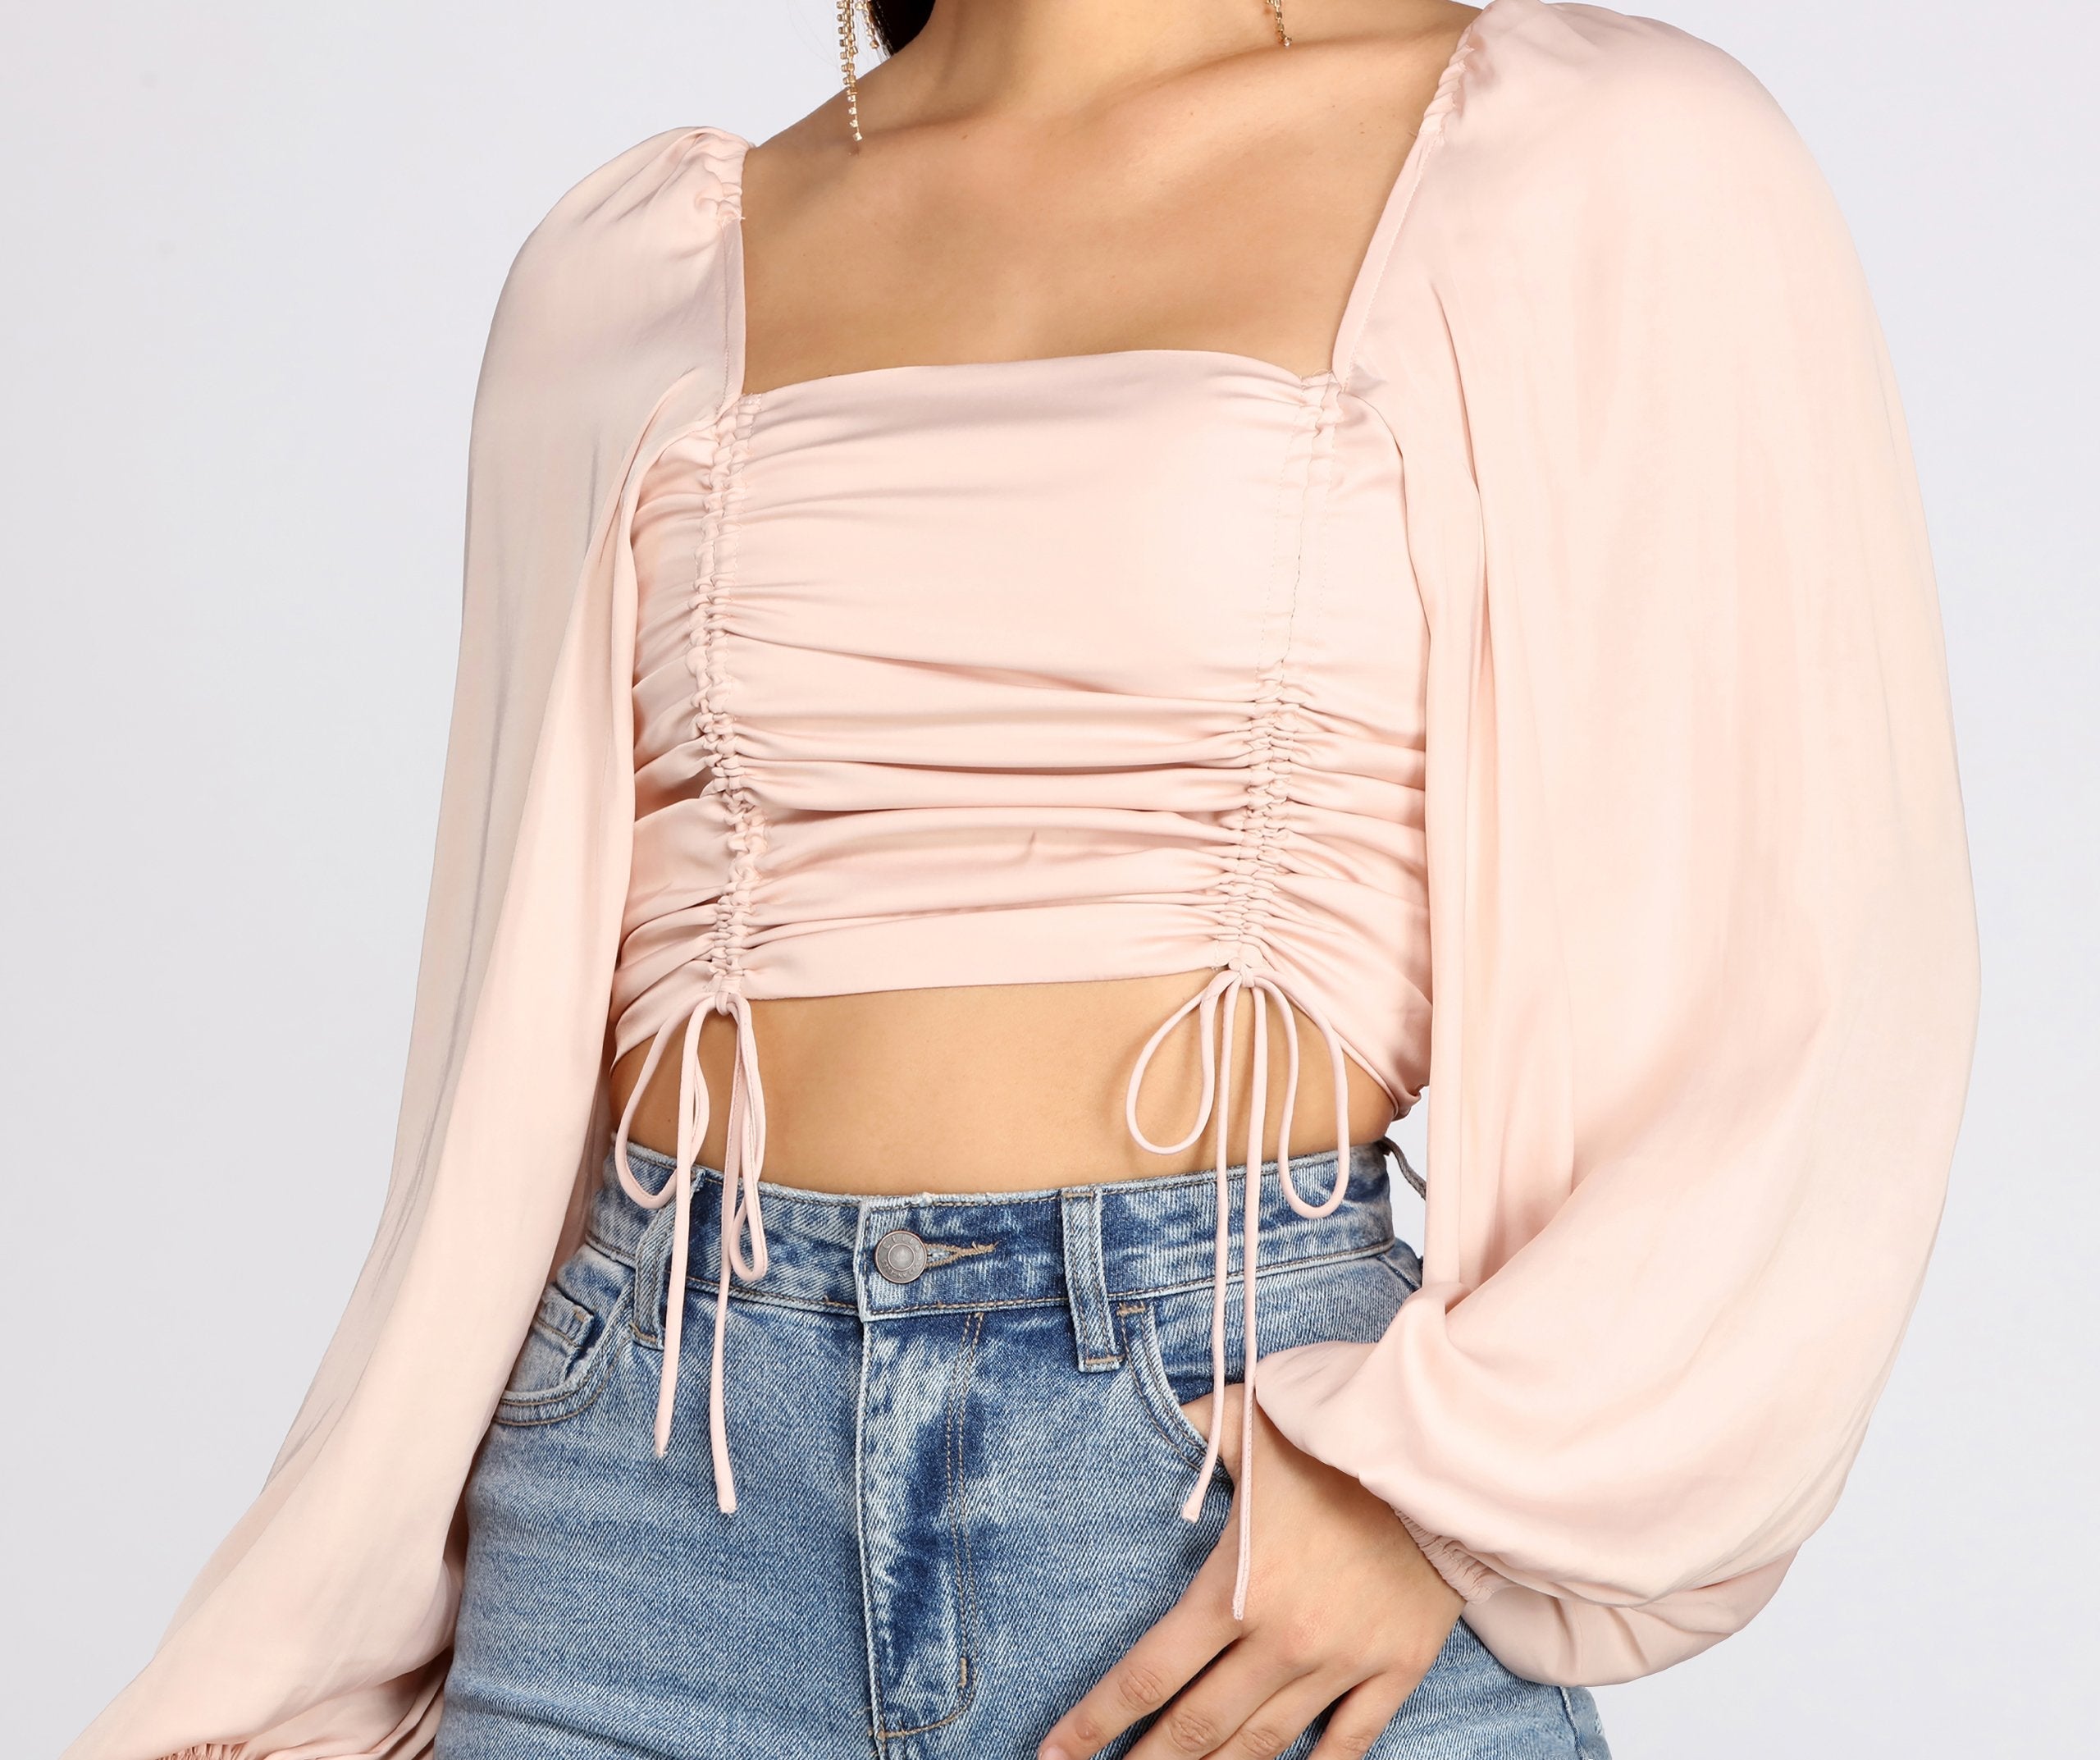 Got That Chic Vibe Crop Top - Lady Occasions